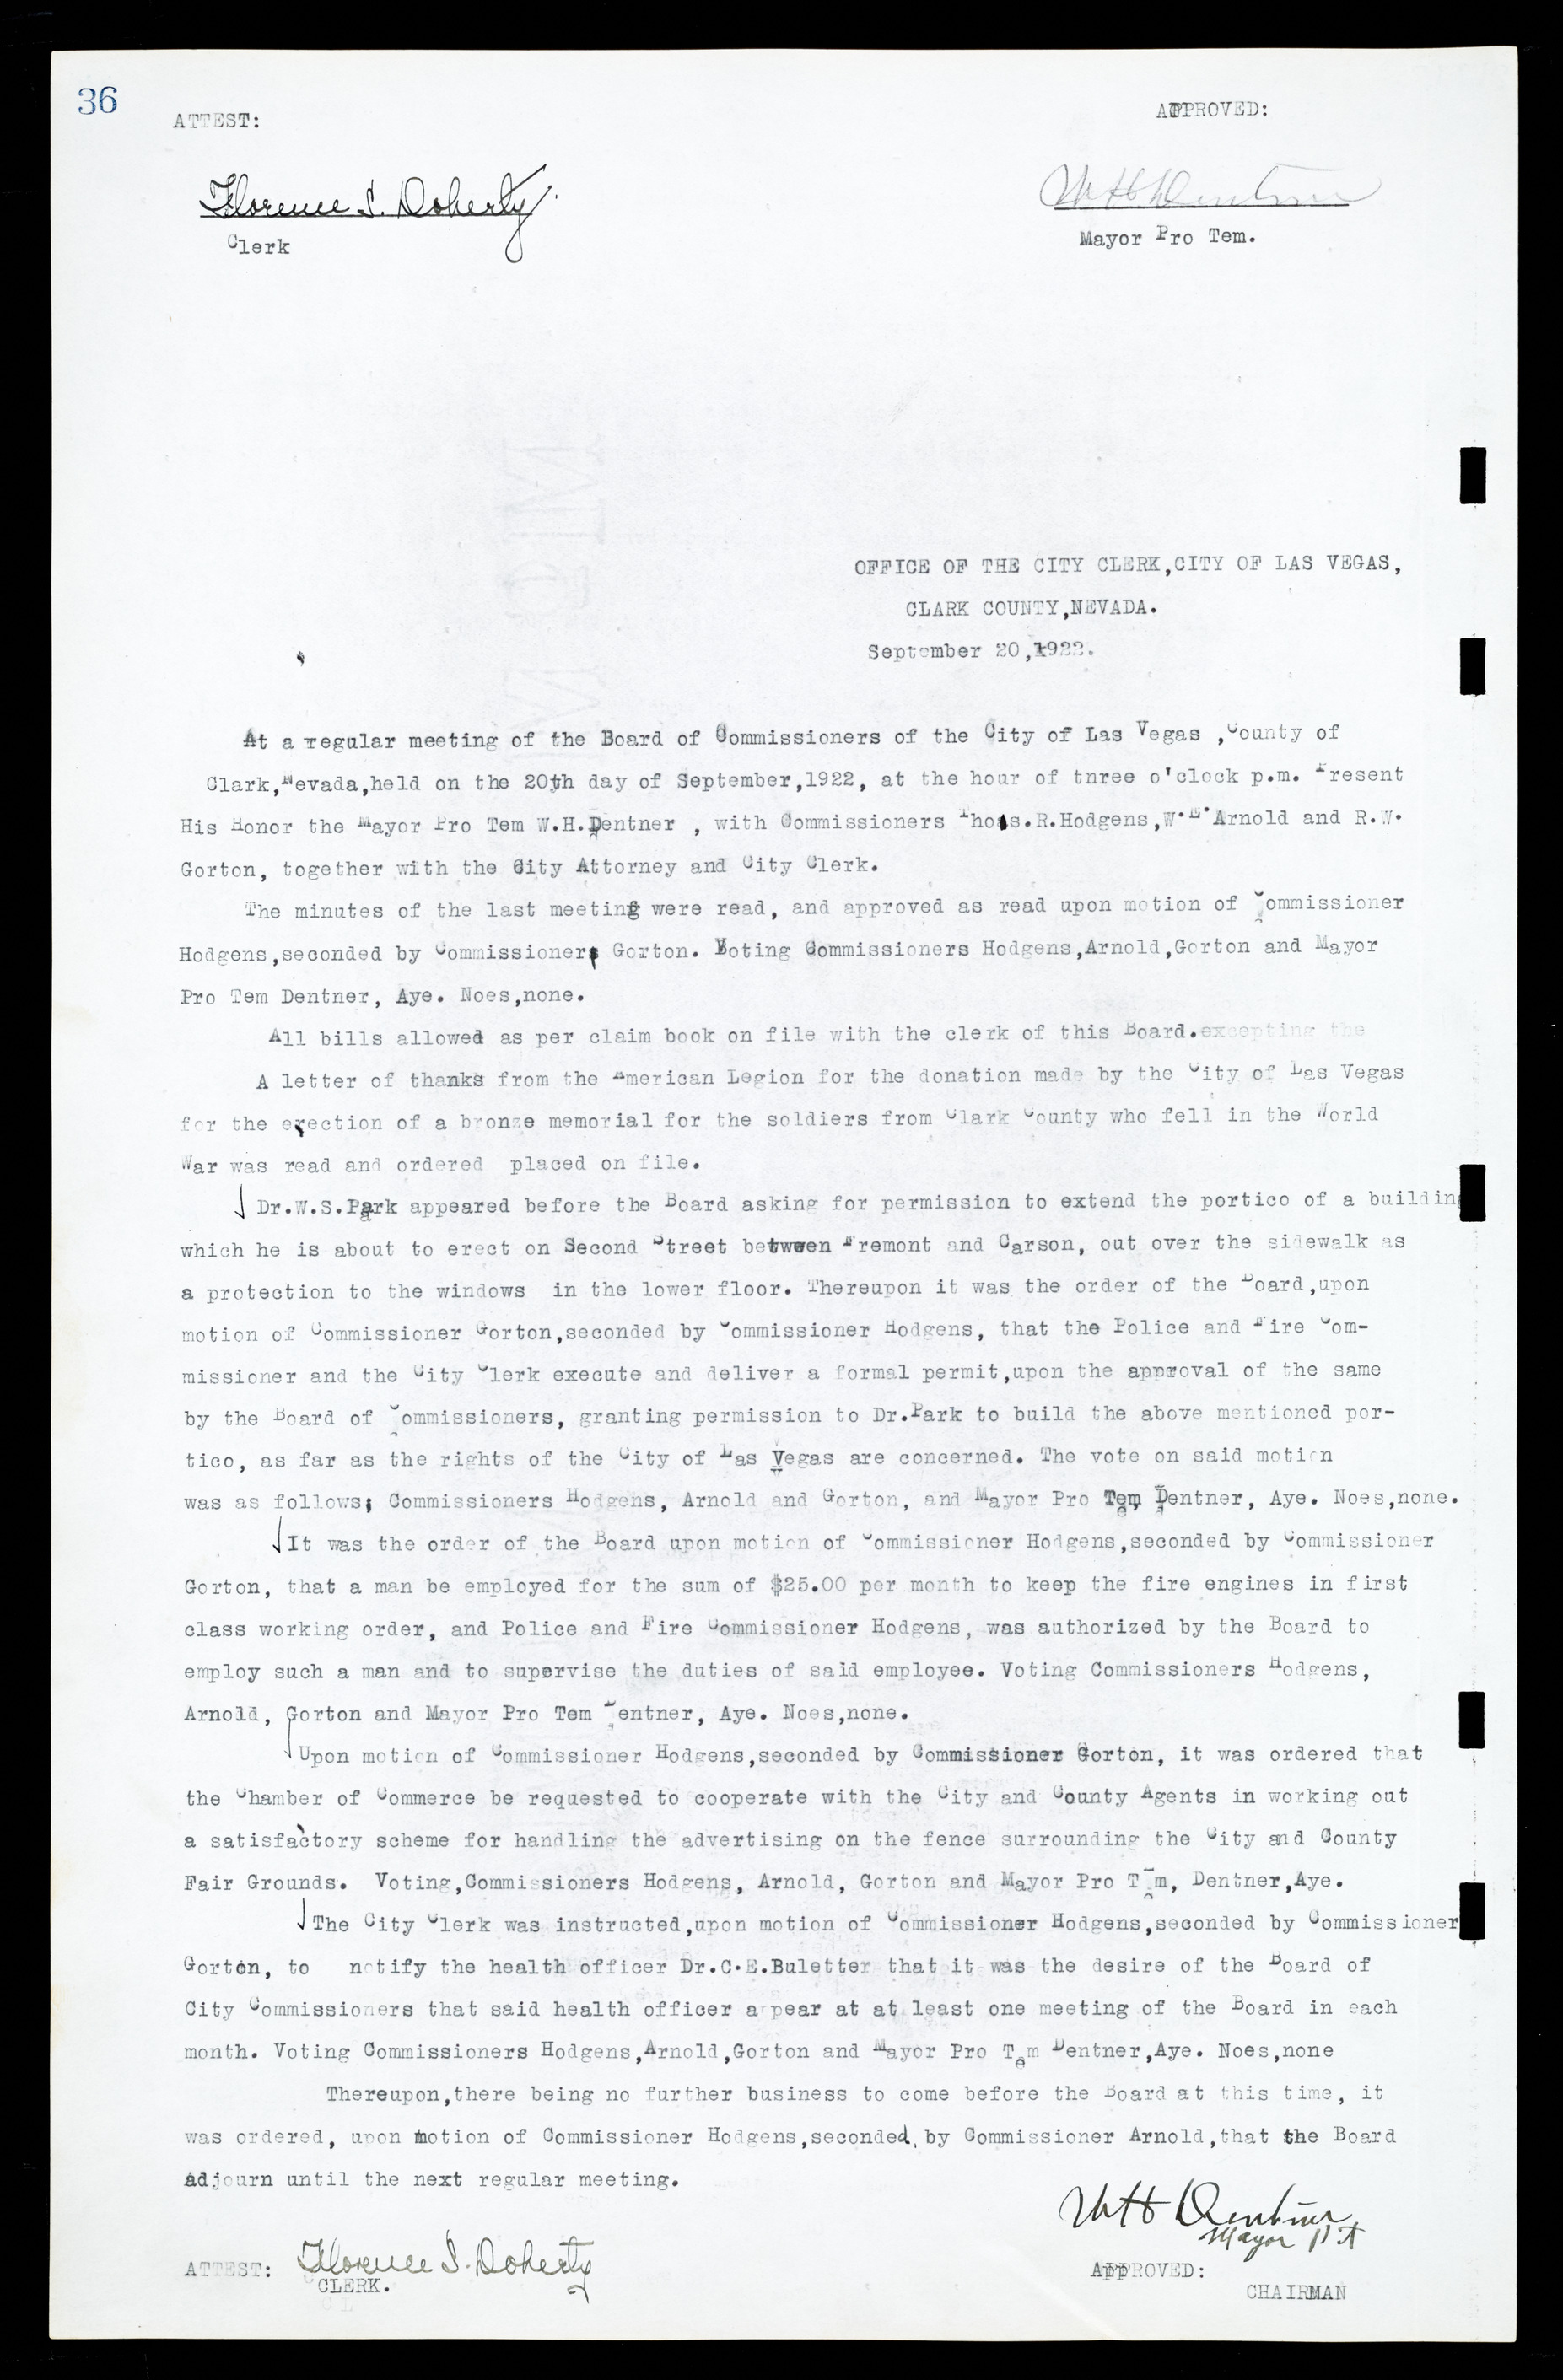 Las Vegas City Commission Minutes, March 1, 1922 to May 10, 1929, lvc000002-43